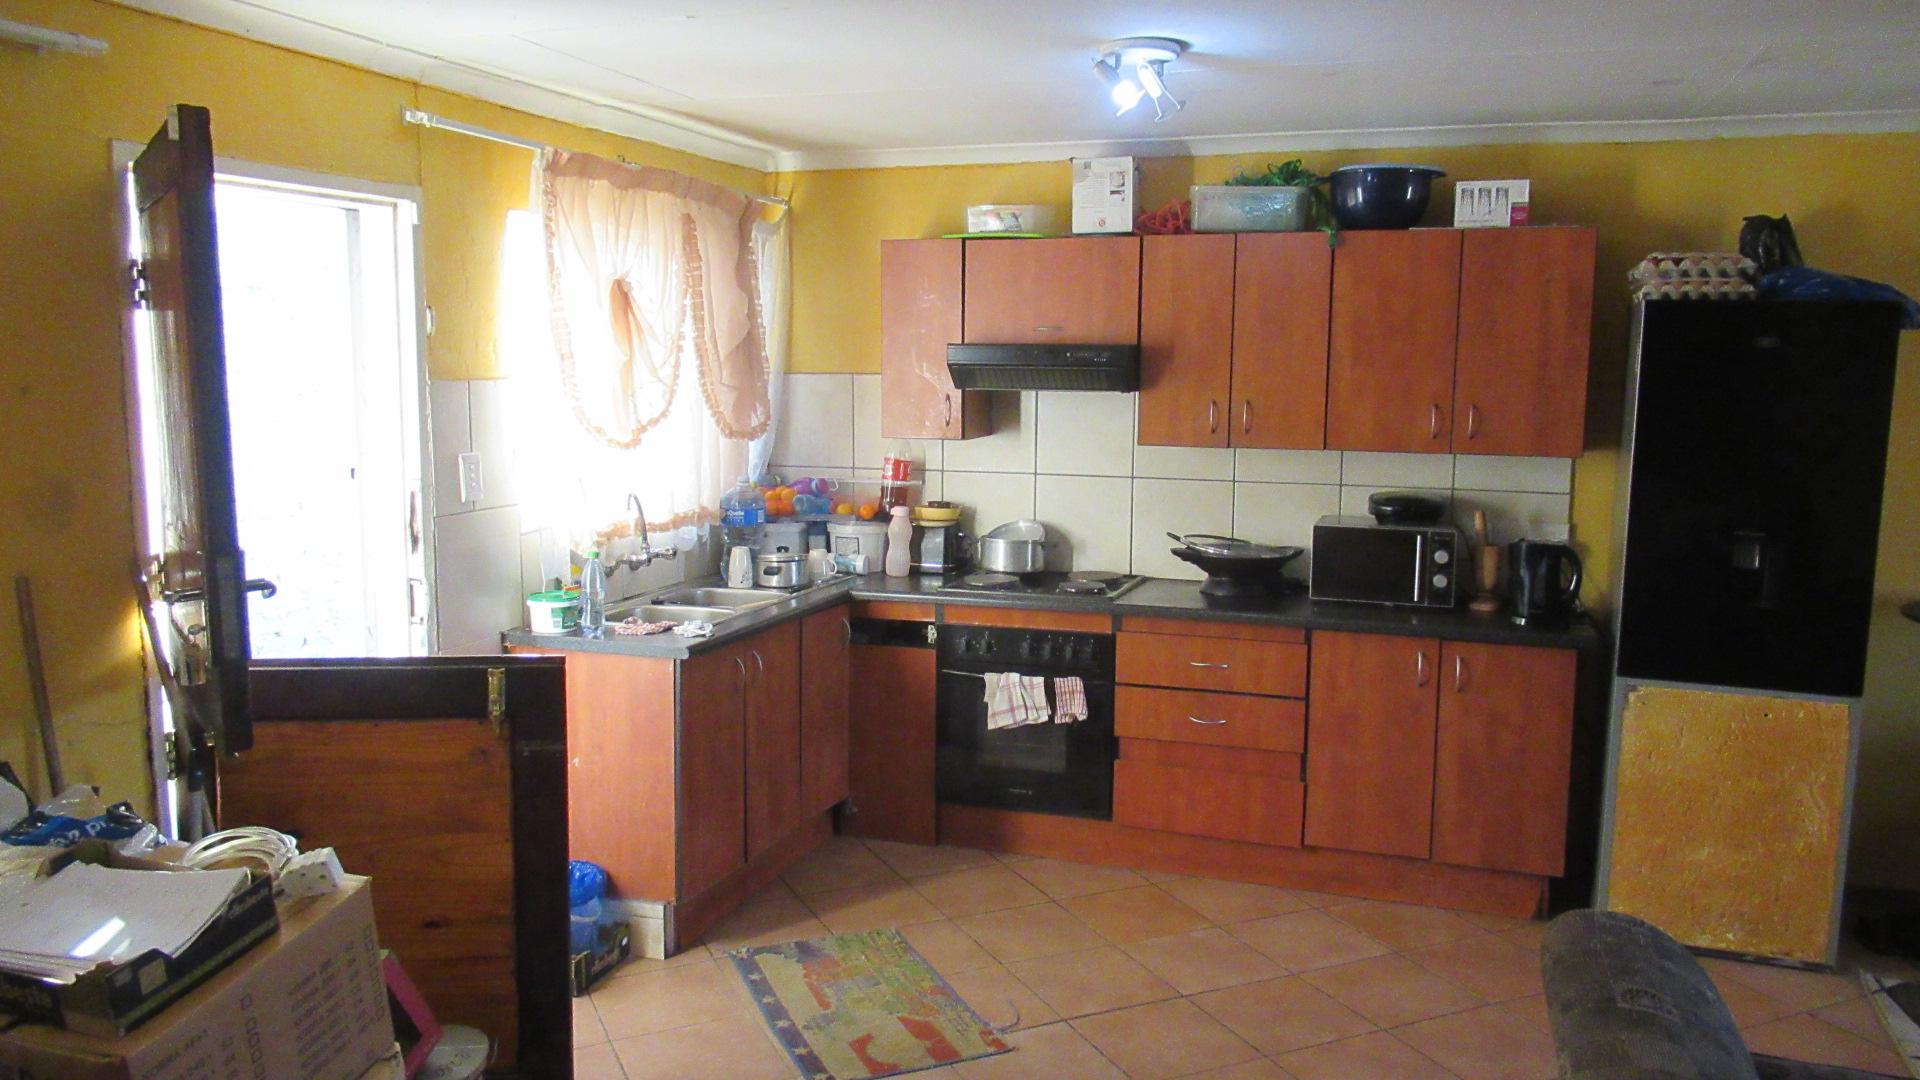 Kitchen - 12 square meters of property in Bedworth Park